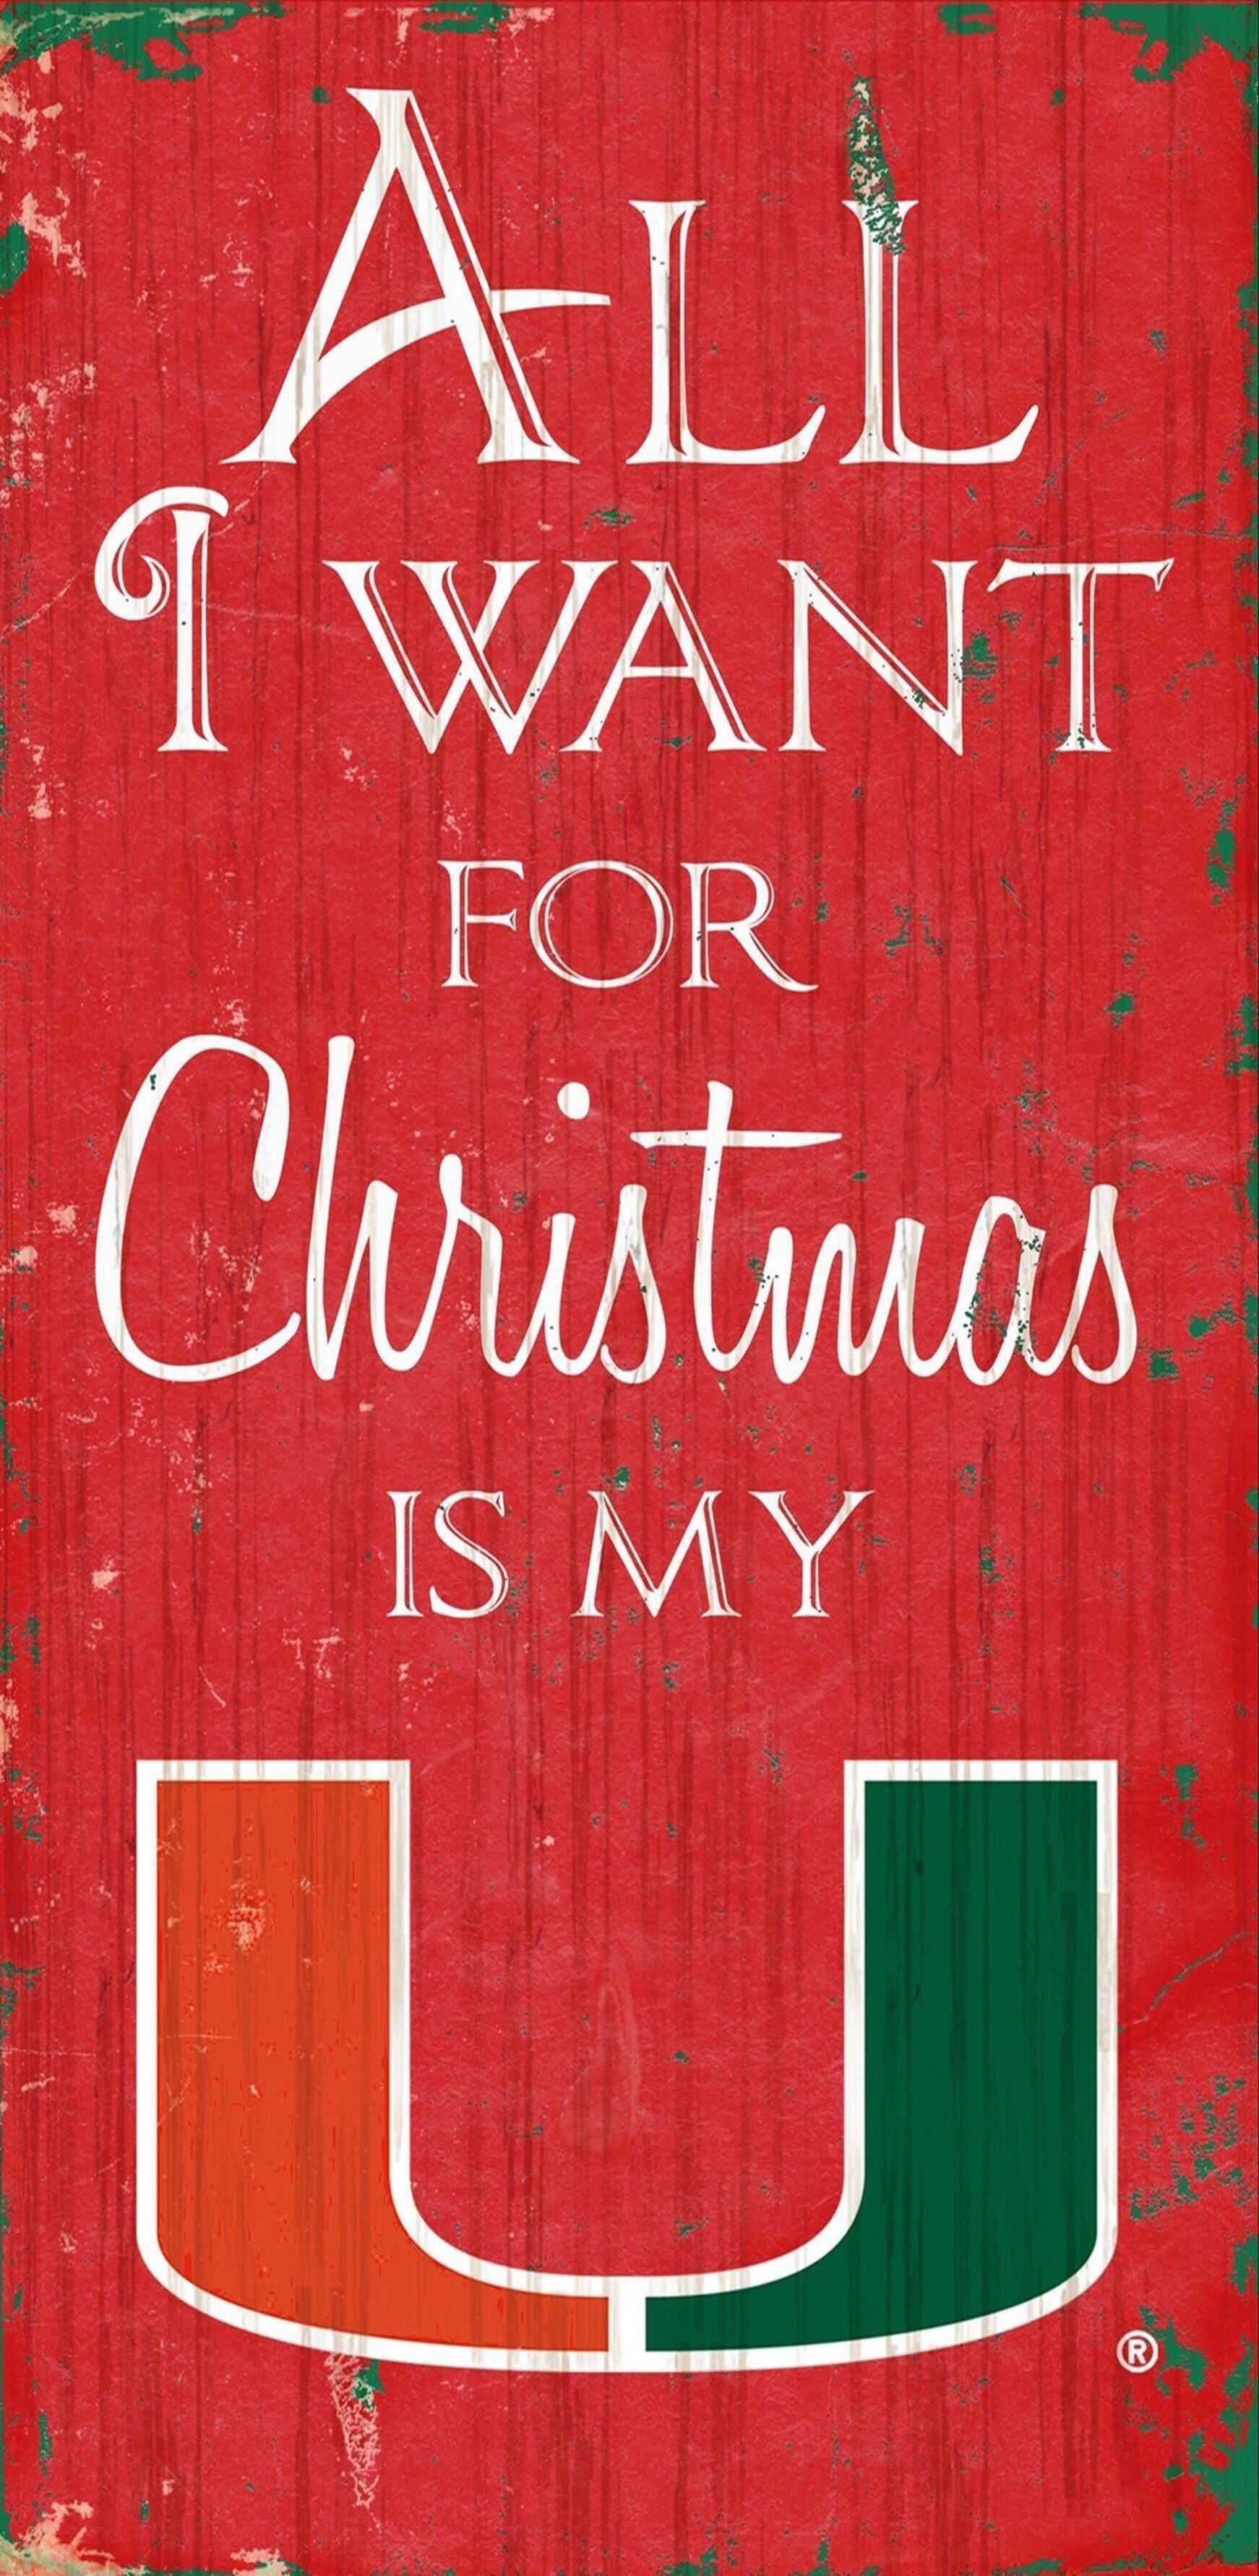 Miami Hurricanes All I Want for Christmas Wooden Sign - 6" x 12"